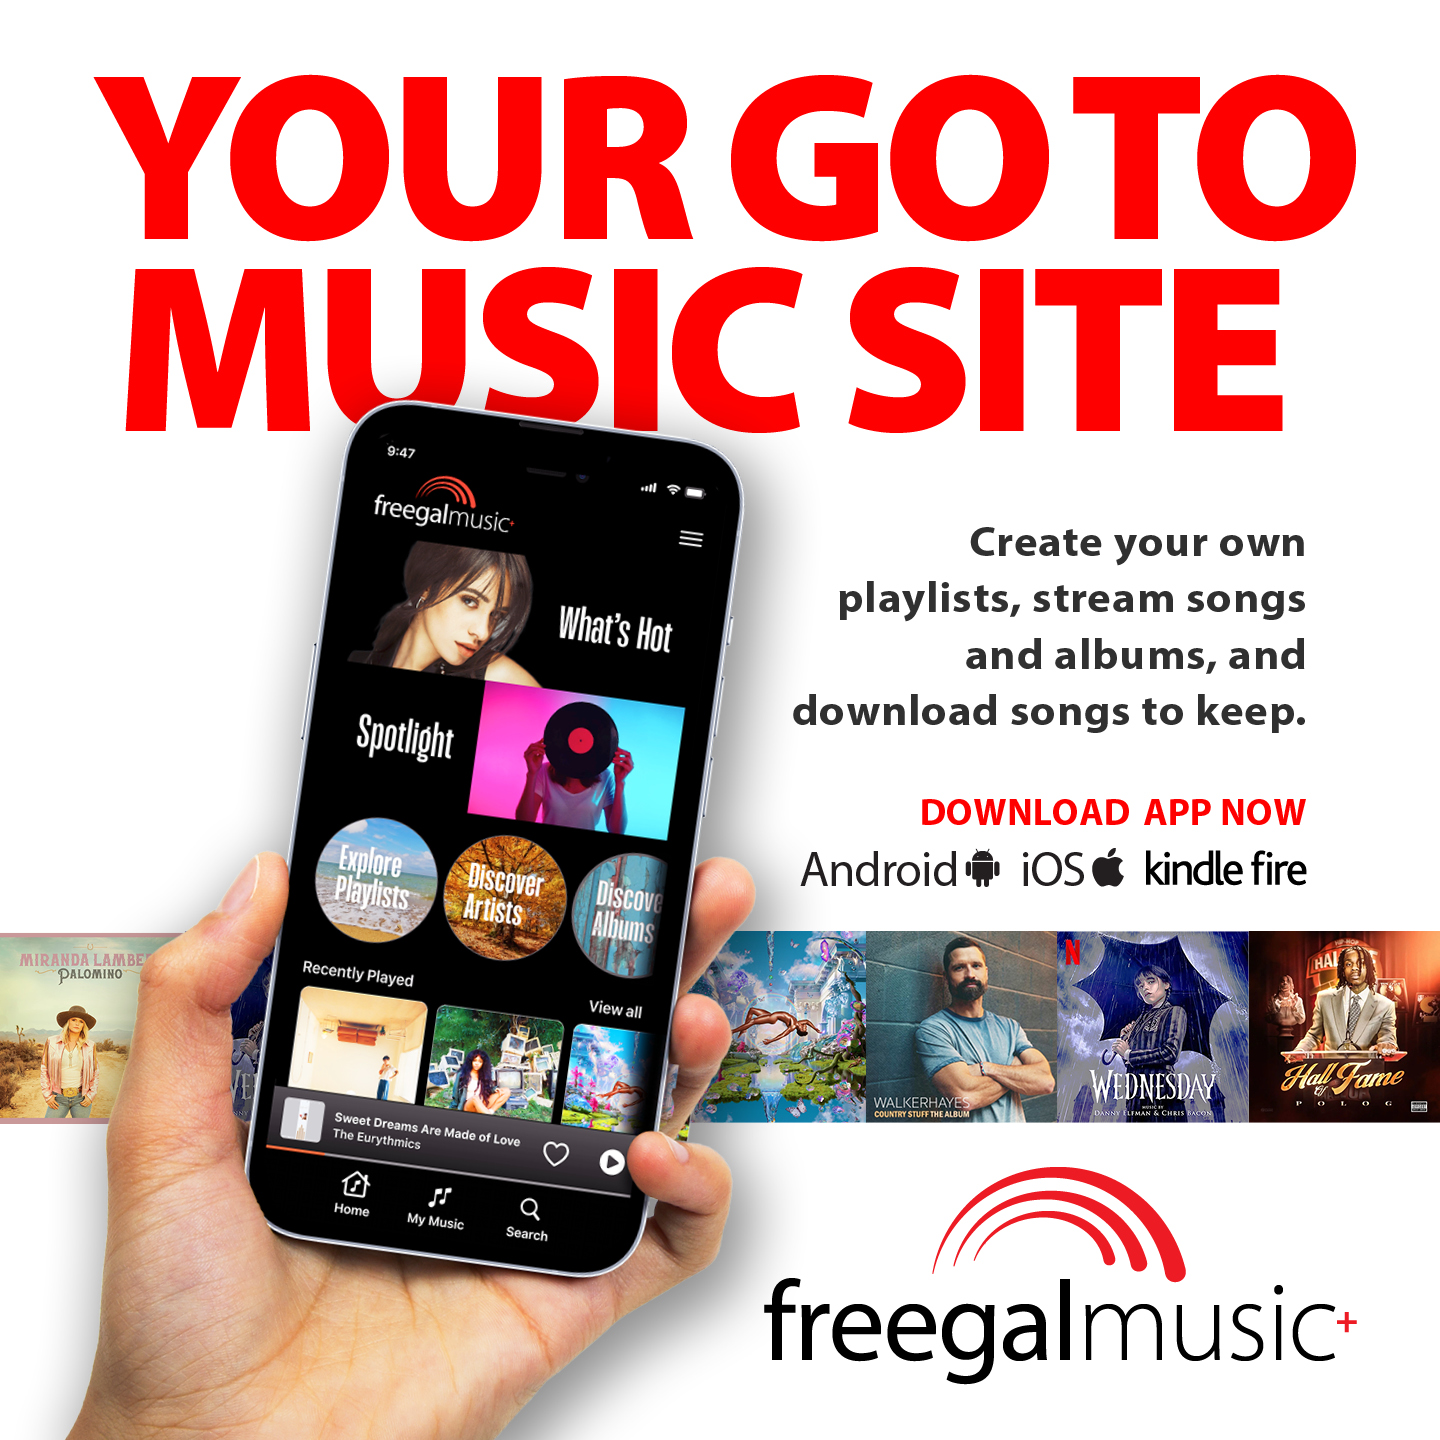 Freegal Music app: your go to music site